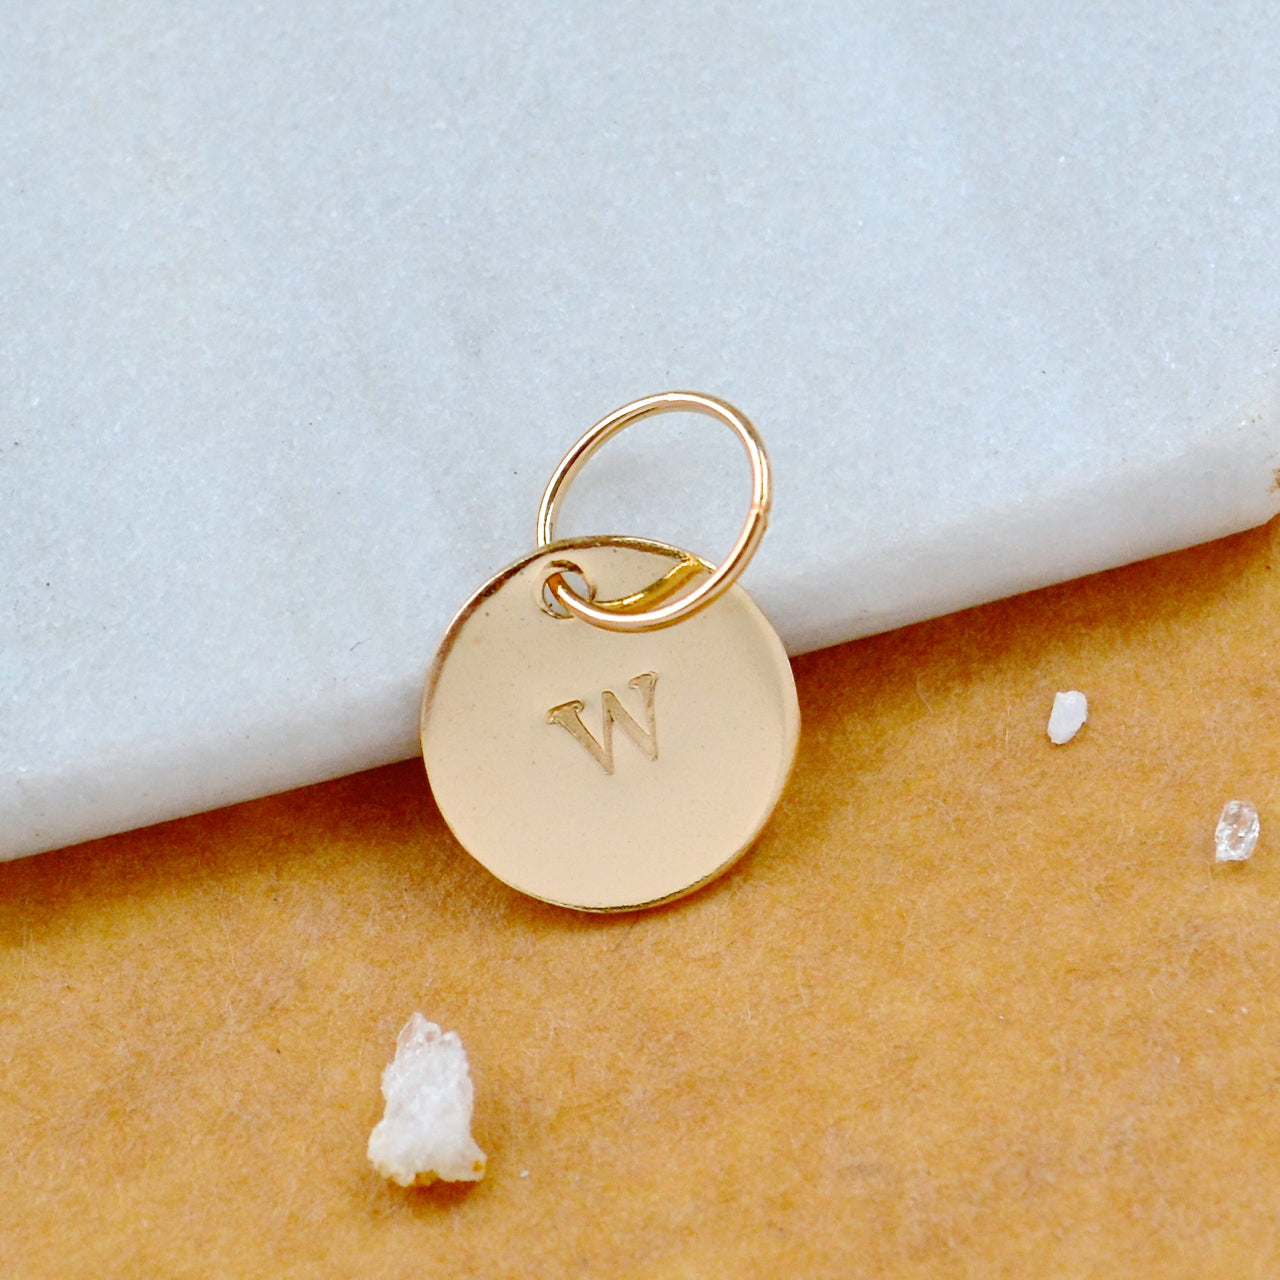 LETTER CHARM, capital W initial charms, handmade alphabet circle charm, W letter pendant, simple jewelry, delicate handmade charms, nickel-free jewelry, gold letter charm